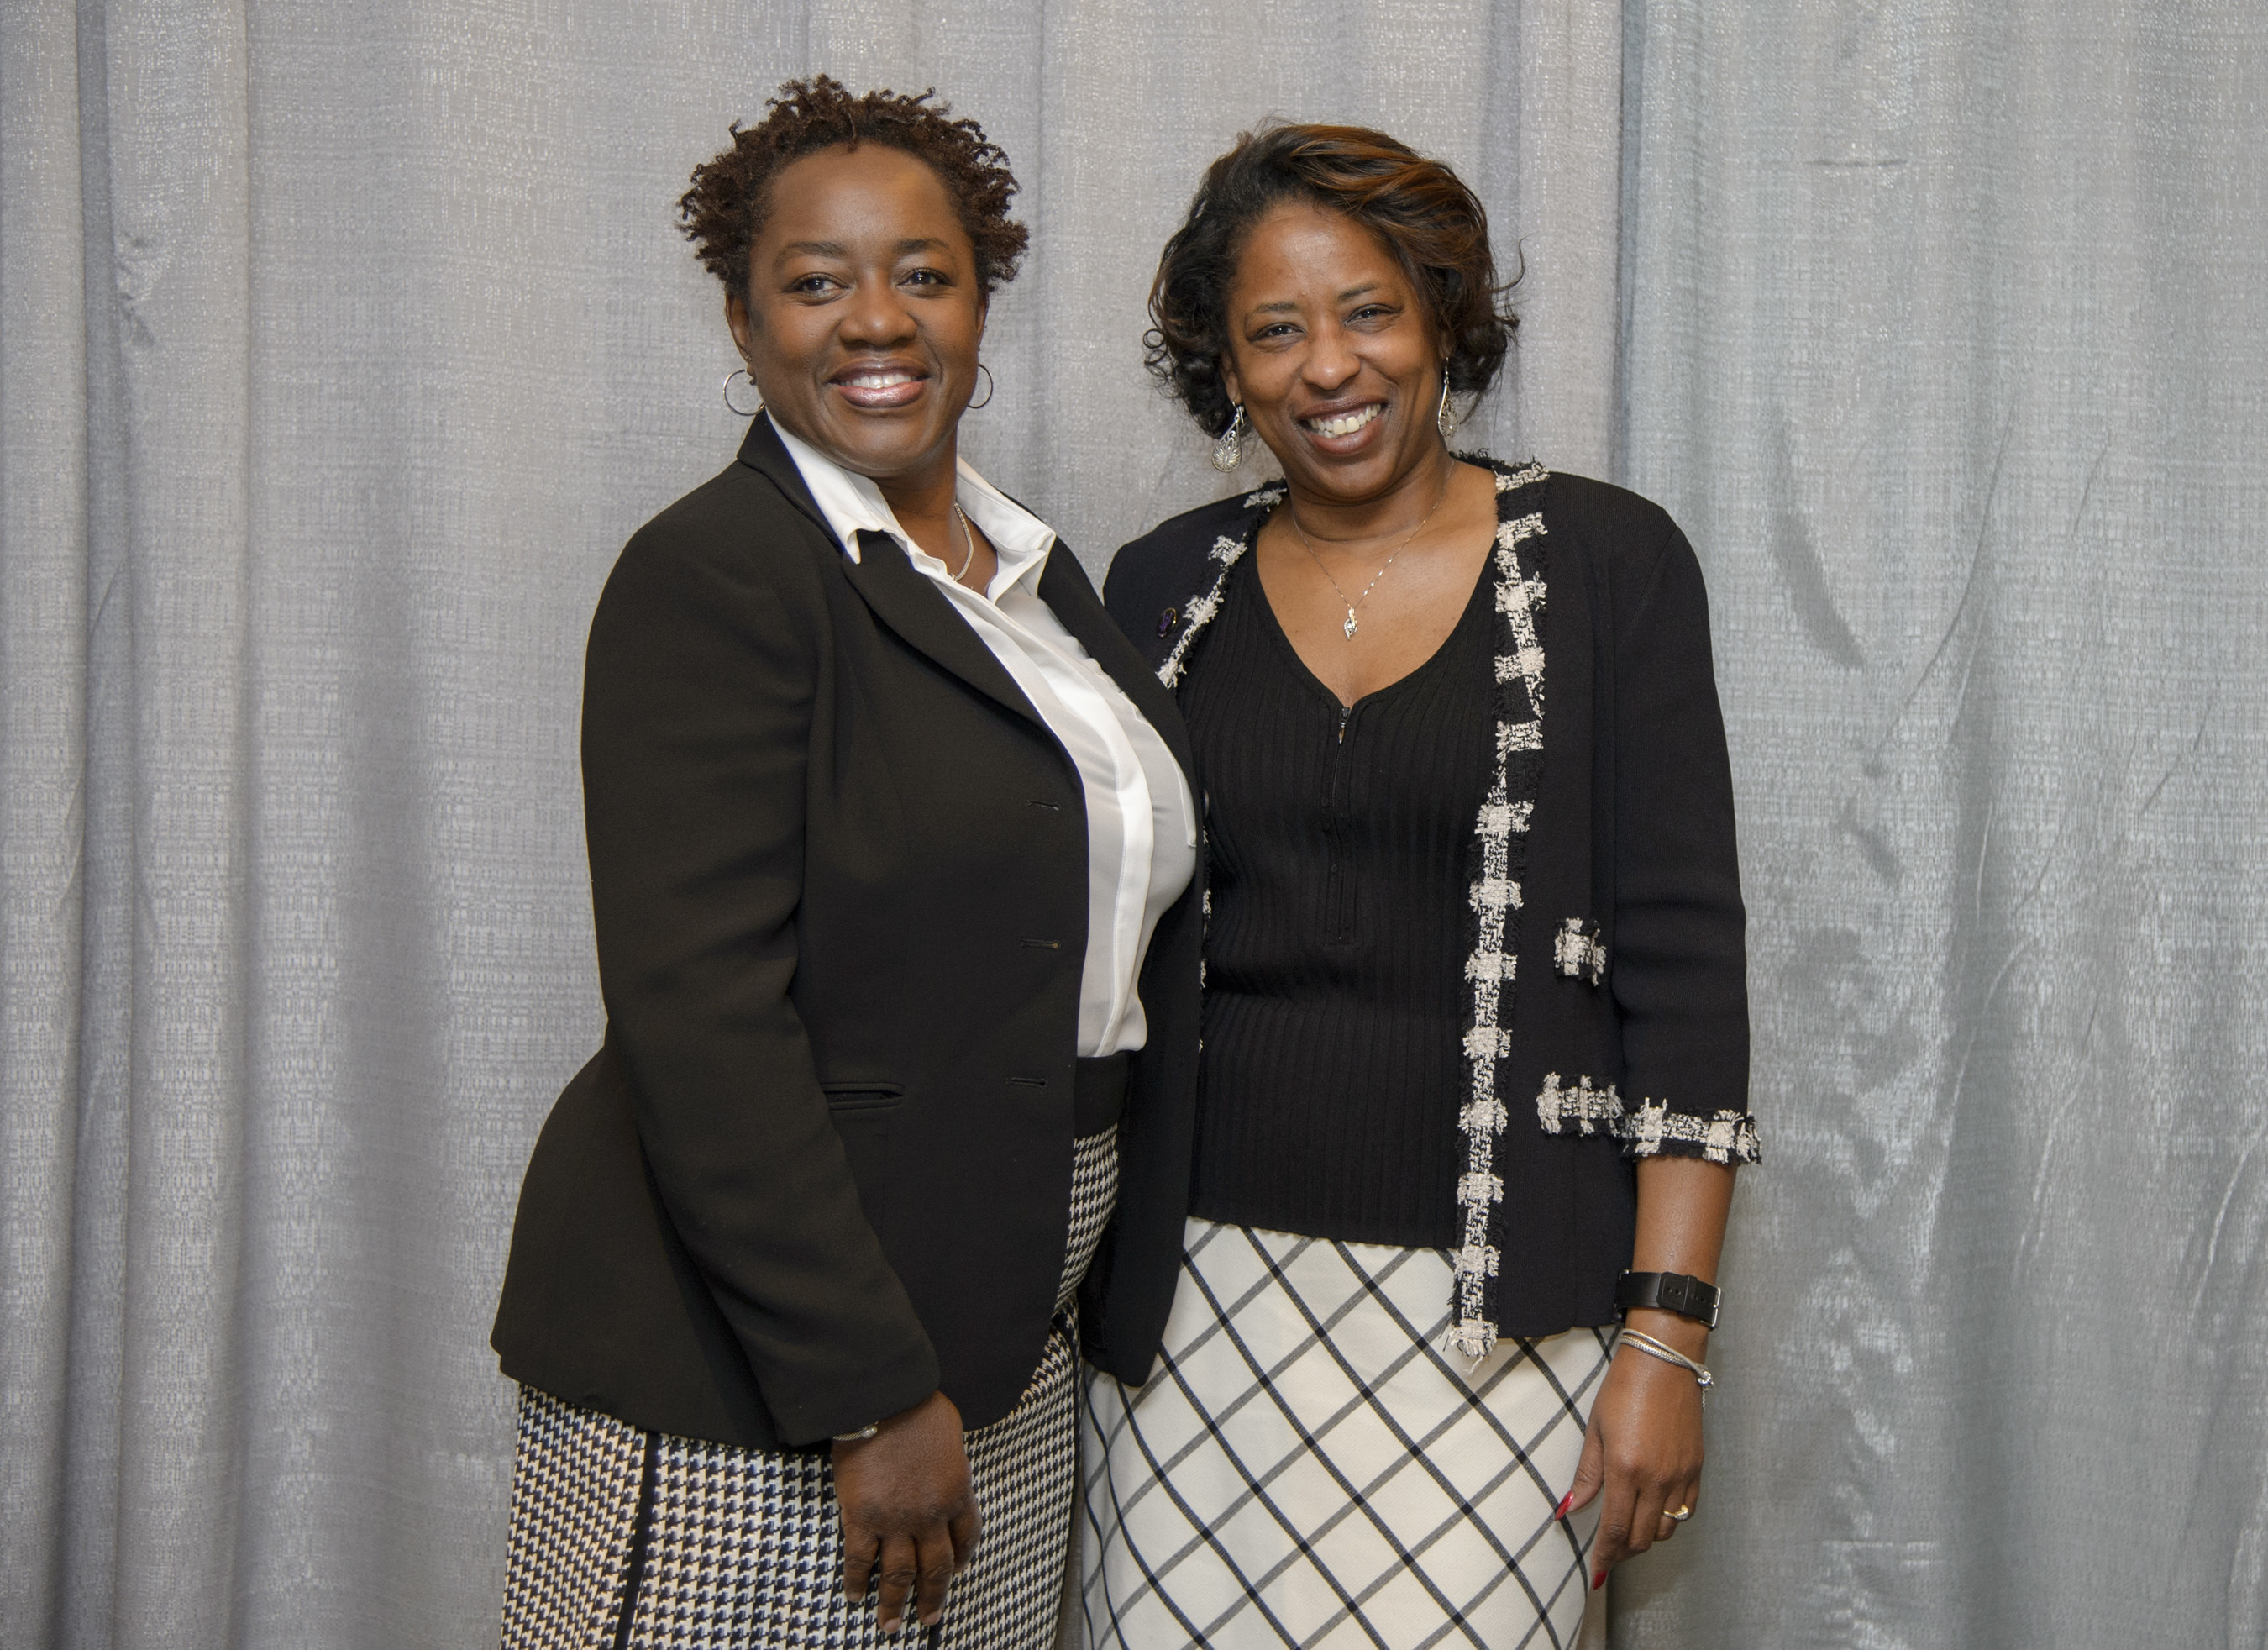 Two Meritor employees were recognized with 2015 Women of Color STEM (science, technology, engineering and mathematics) awards Oct. 16. Linda Taliaferro (left), vice president, Quality, earned a Special Recognition Award for her dedicated service in advancing technology and science. Sonya Moore, program manager, received a Technology Rising Star Award for helping to shape future technologies. Photo credit: Nancy Jo Brown/106FOTO